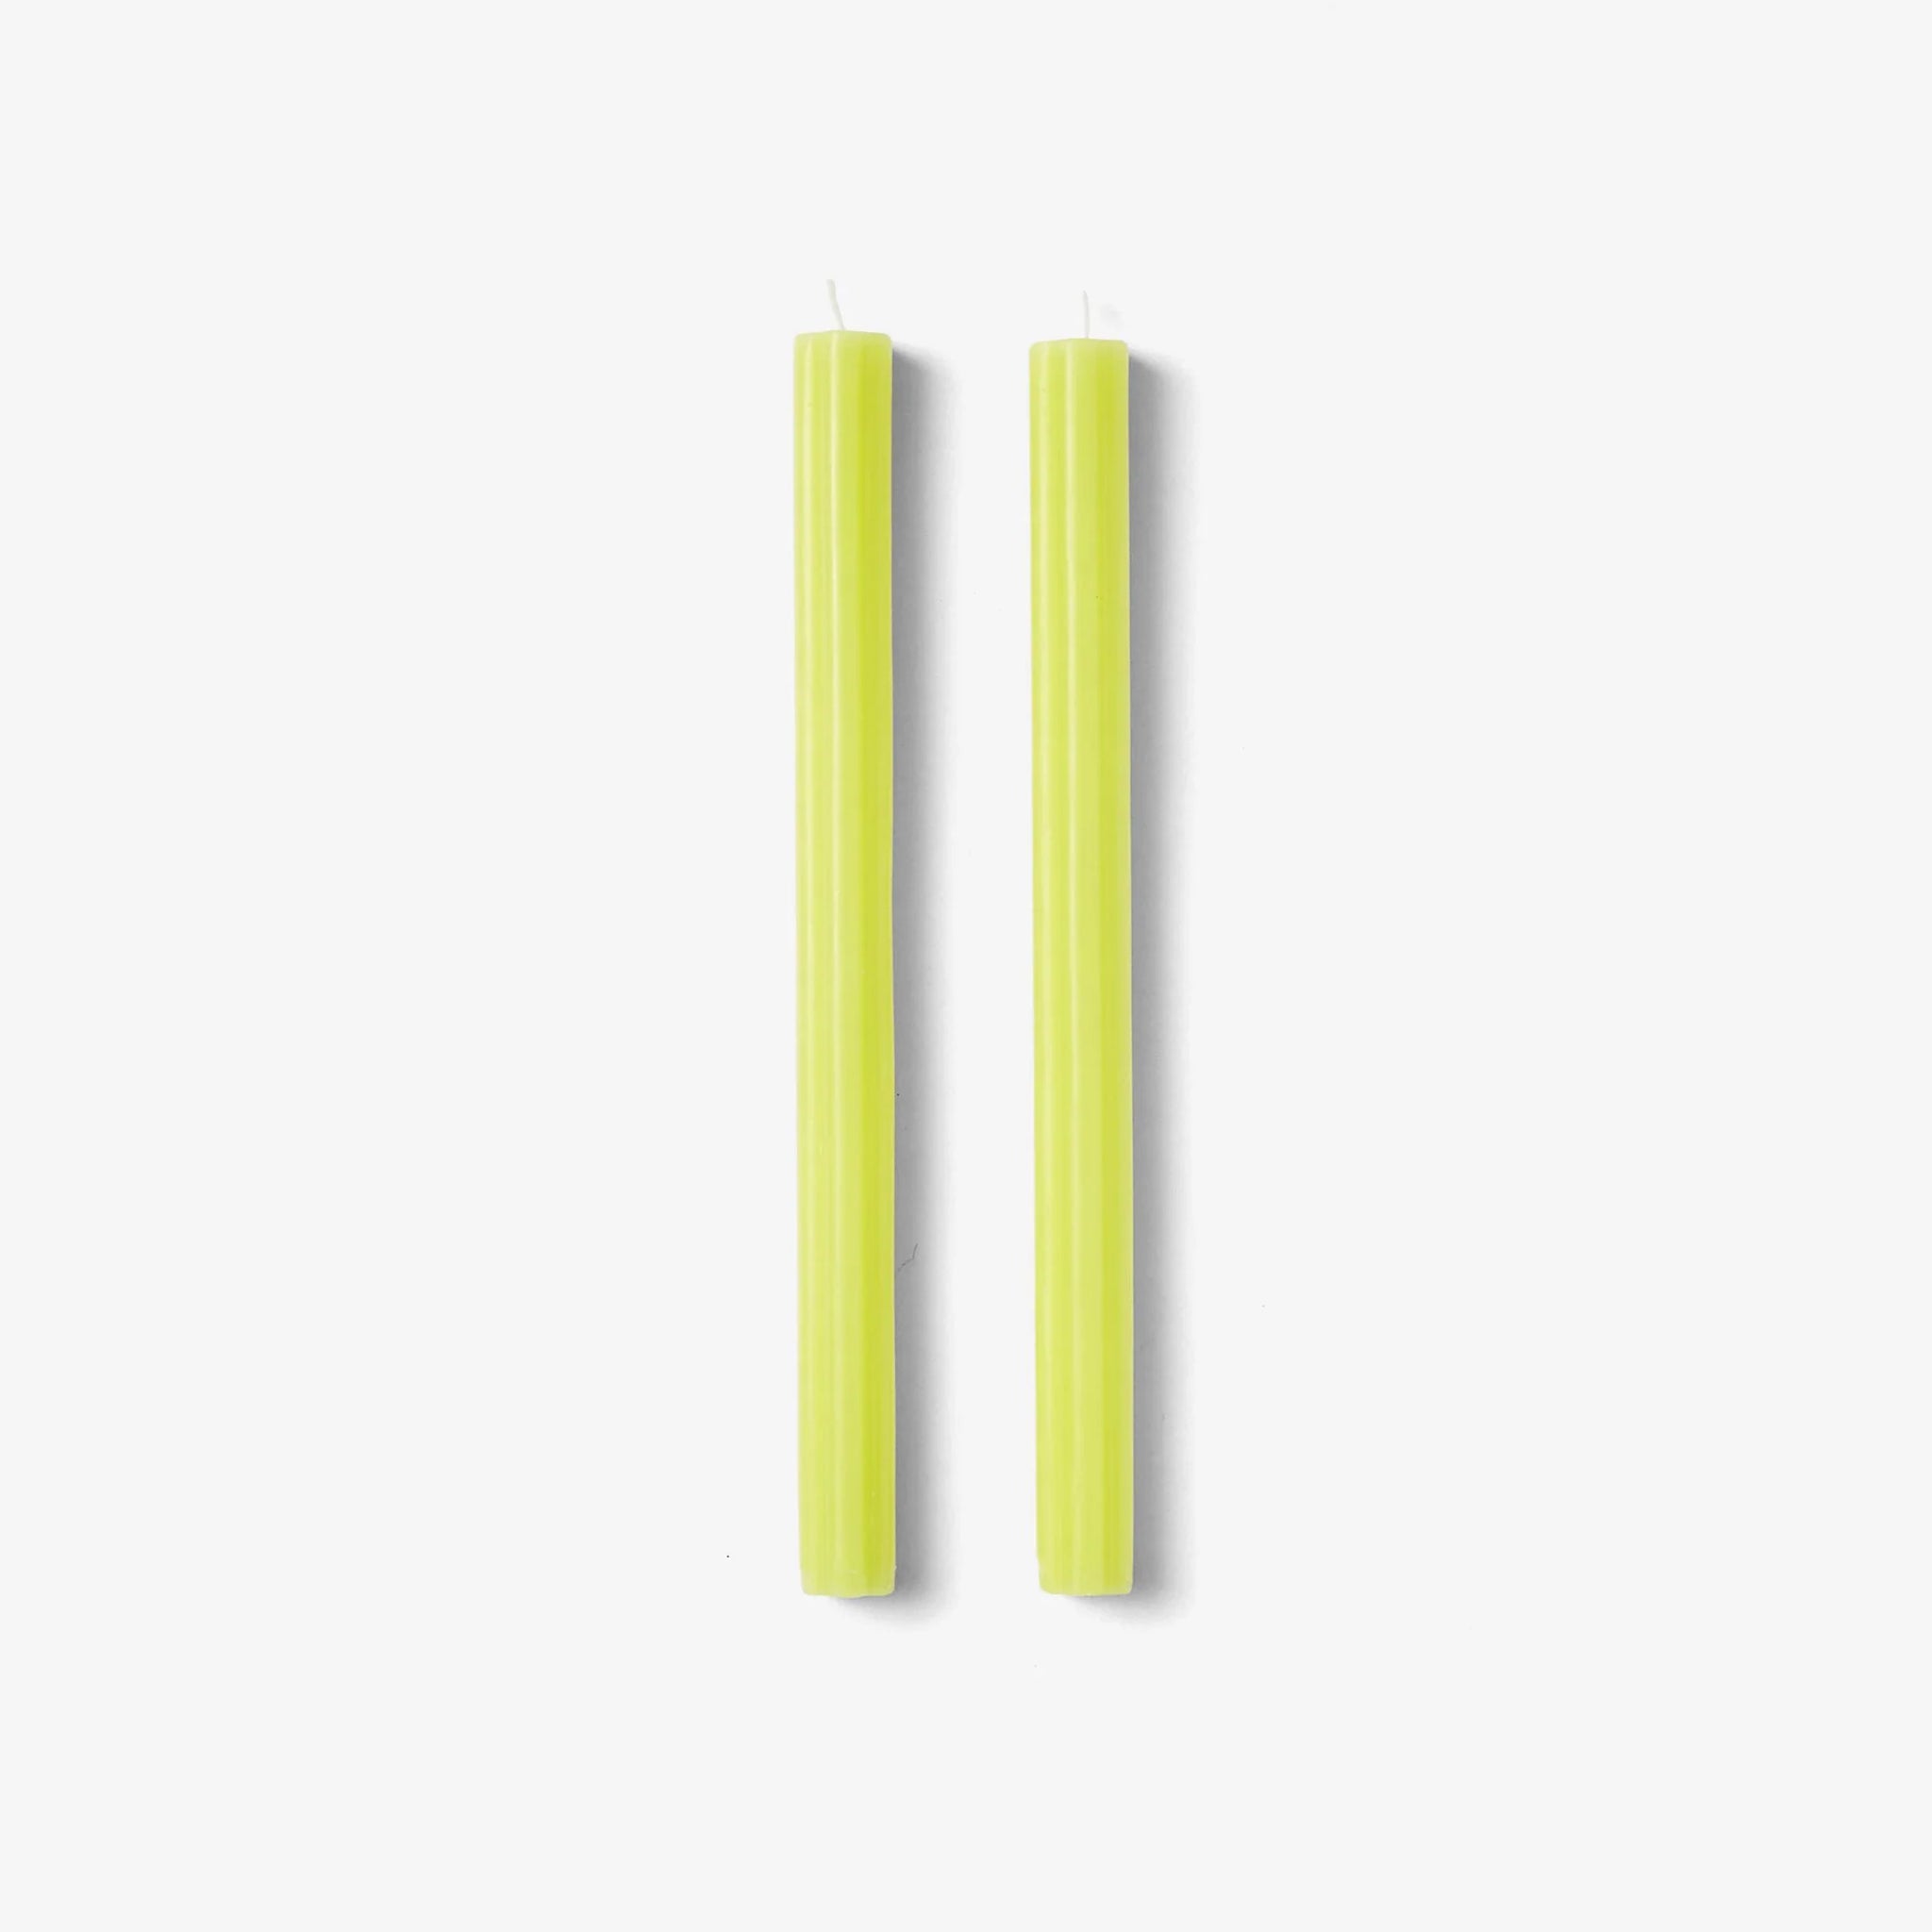 Dusen Dusen Taper Candles in Yellow | Set of 2